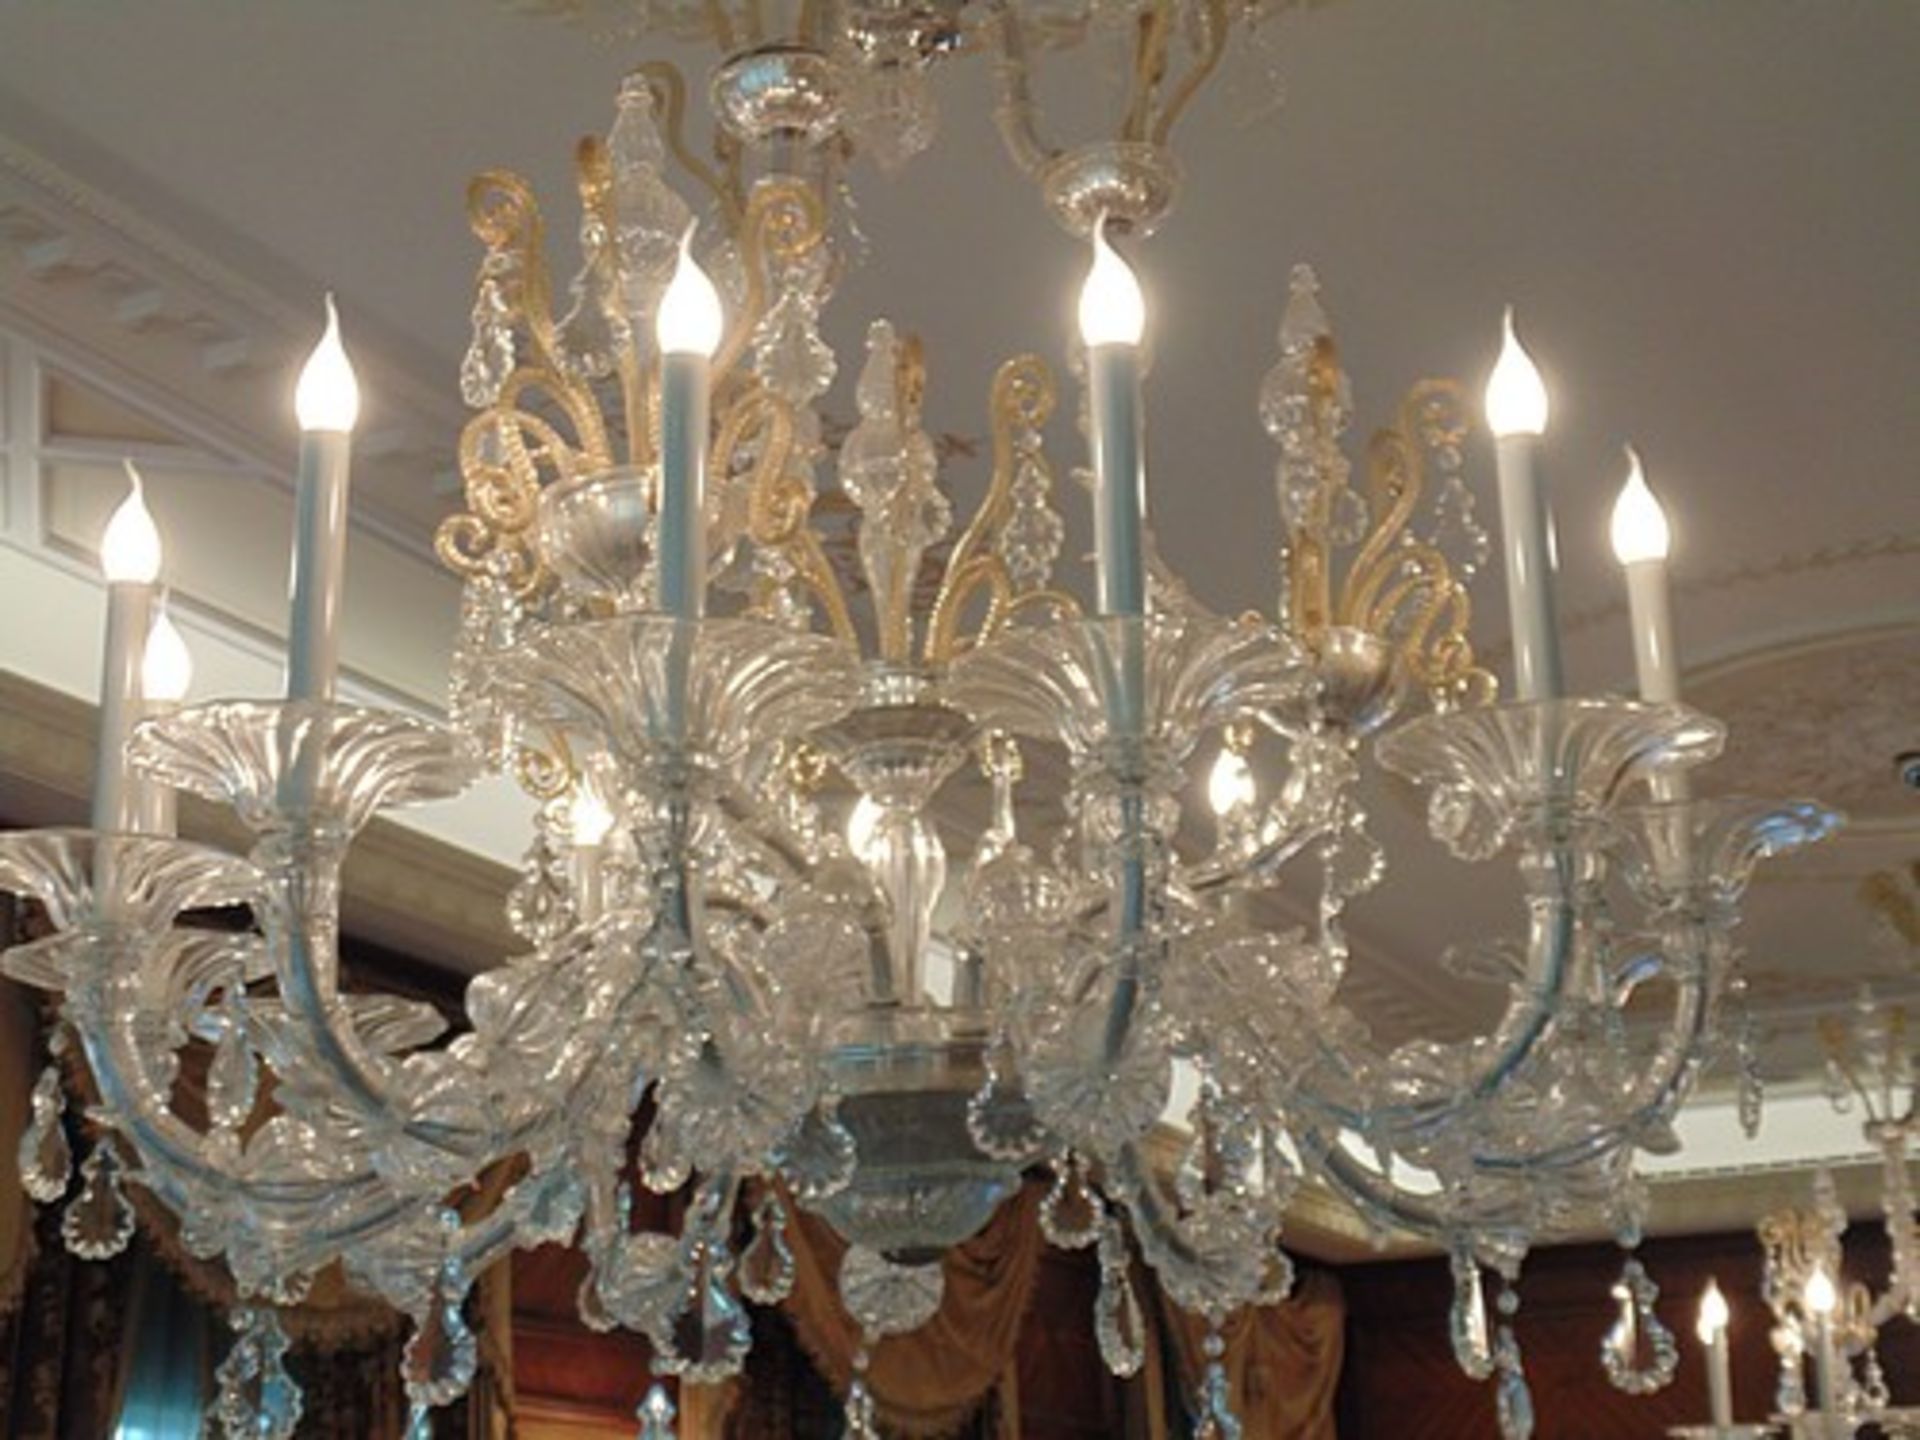 Taif Murano chandelier by Barovier & Toso 12 arm crystal chandelier, with gilded and chromed metal - Image 4 of 8